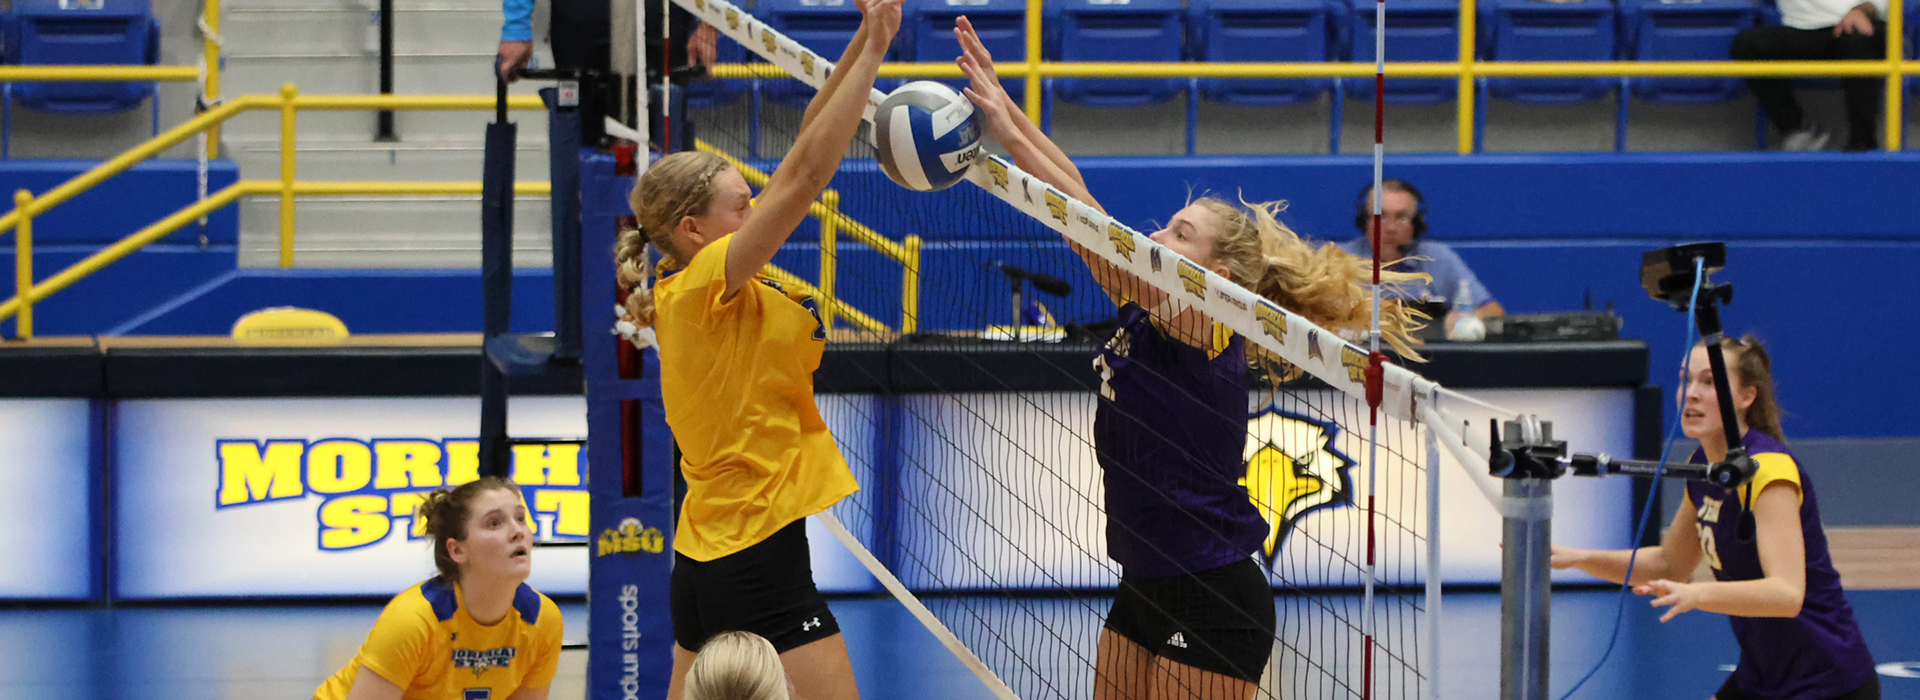 Morehead State bests Tech in midweek match-up